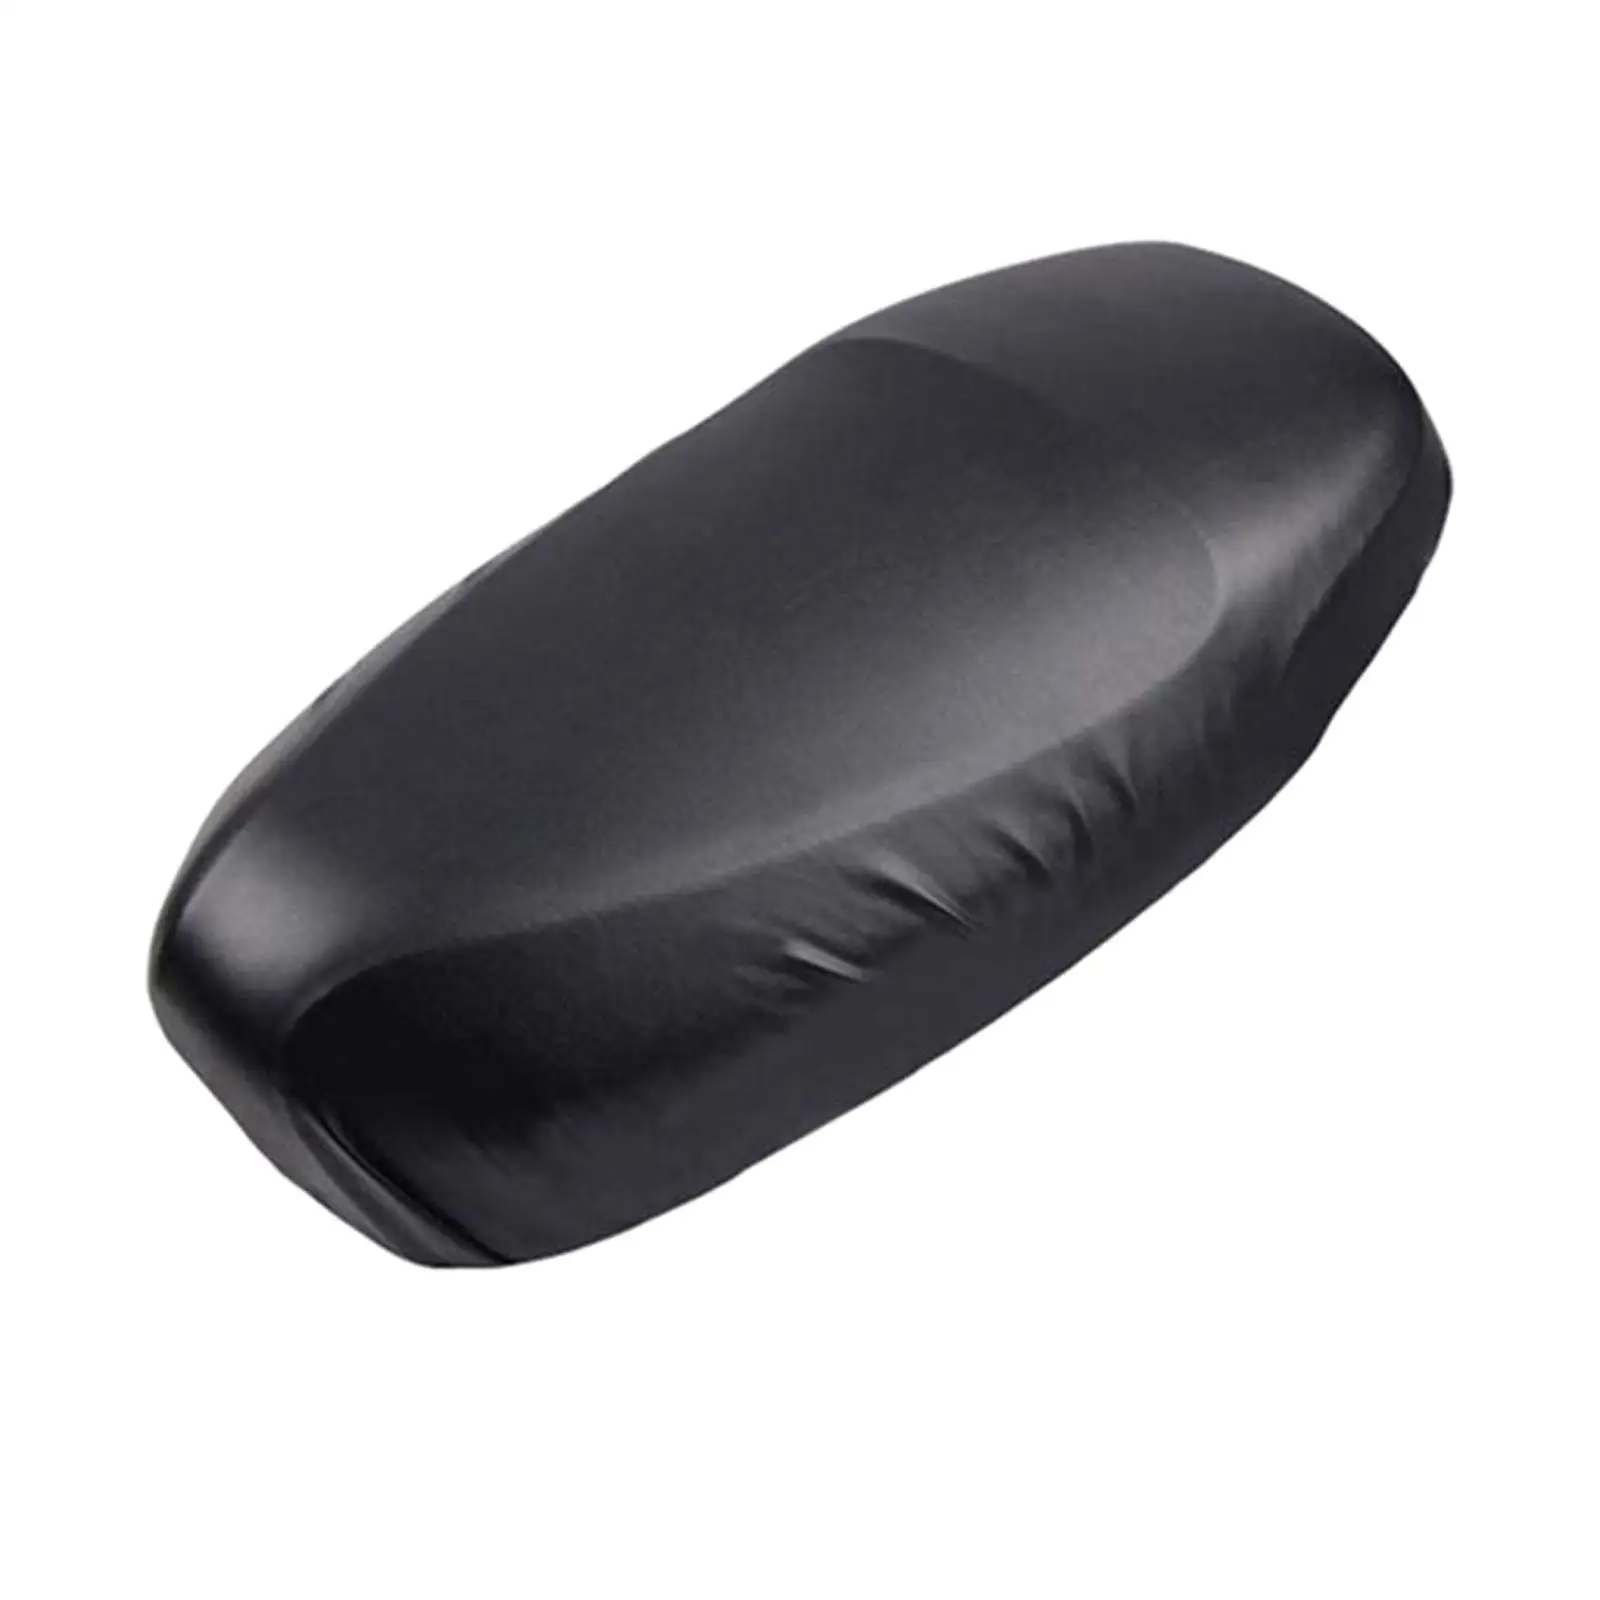 Motorcycle Seat Cushion Cover Seat Protector Cover for Outdoor